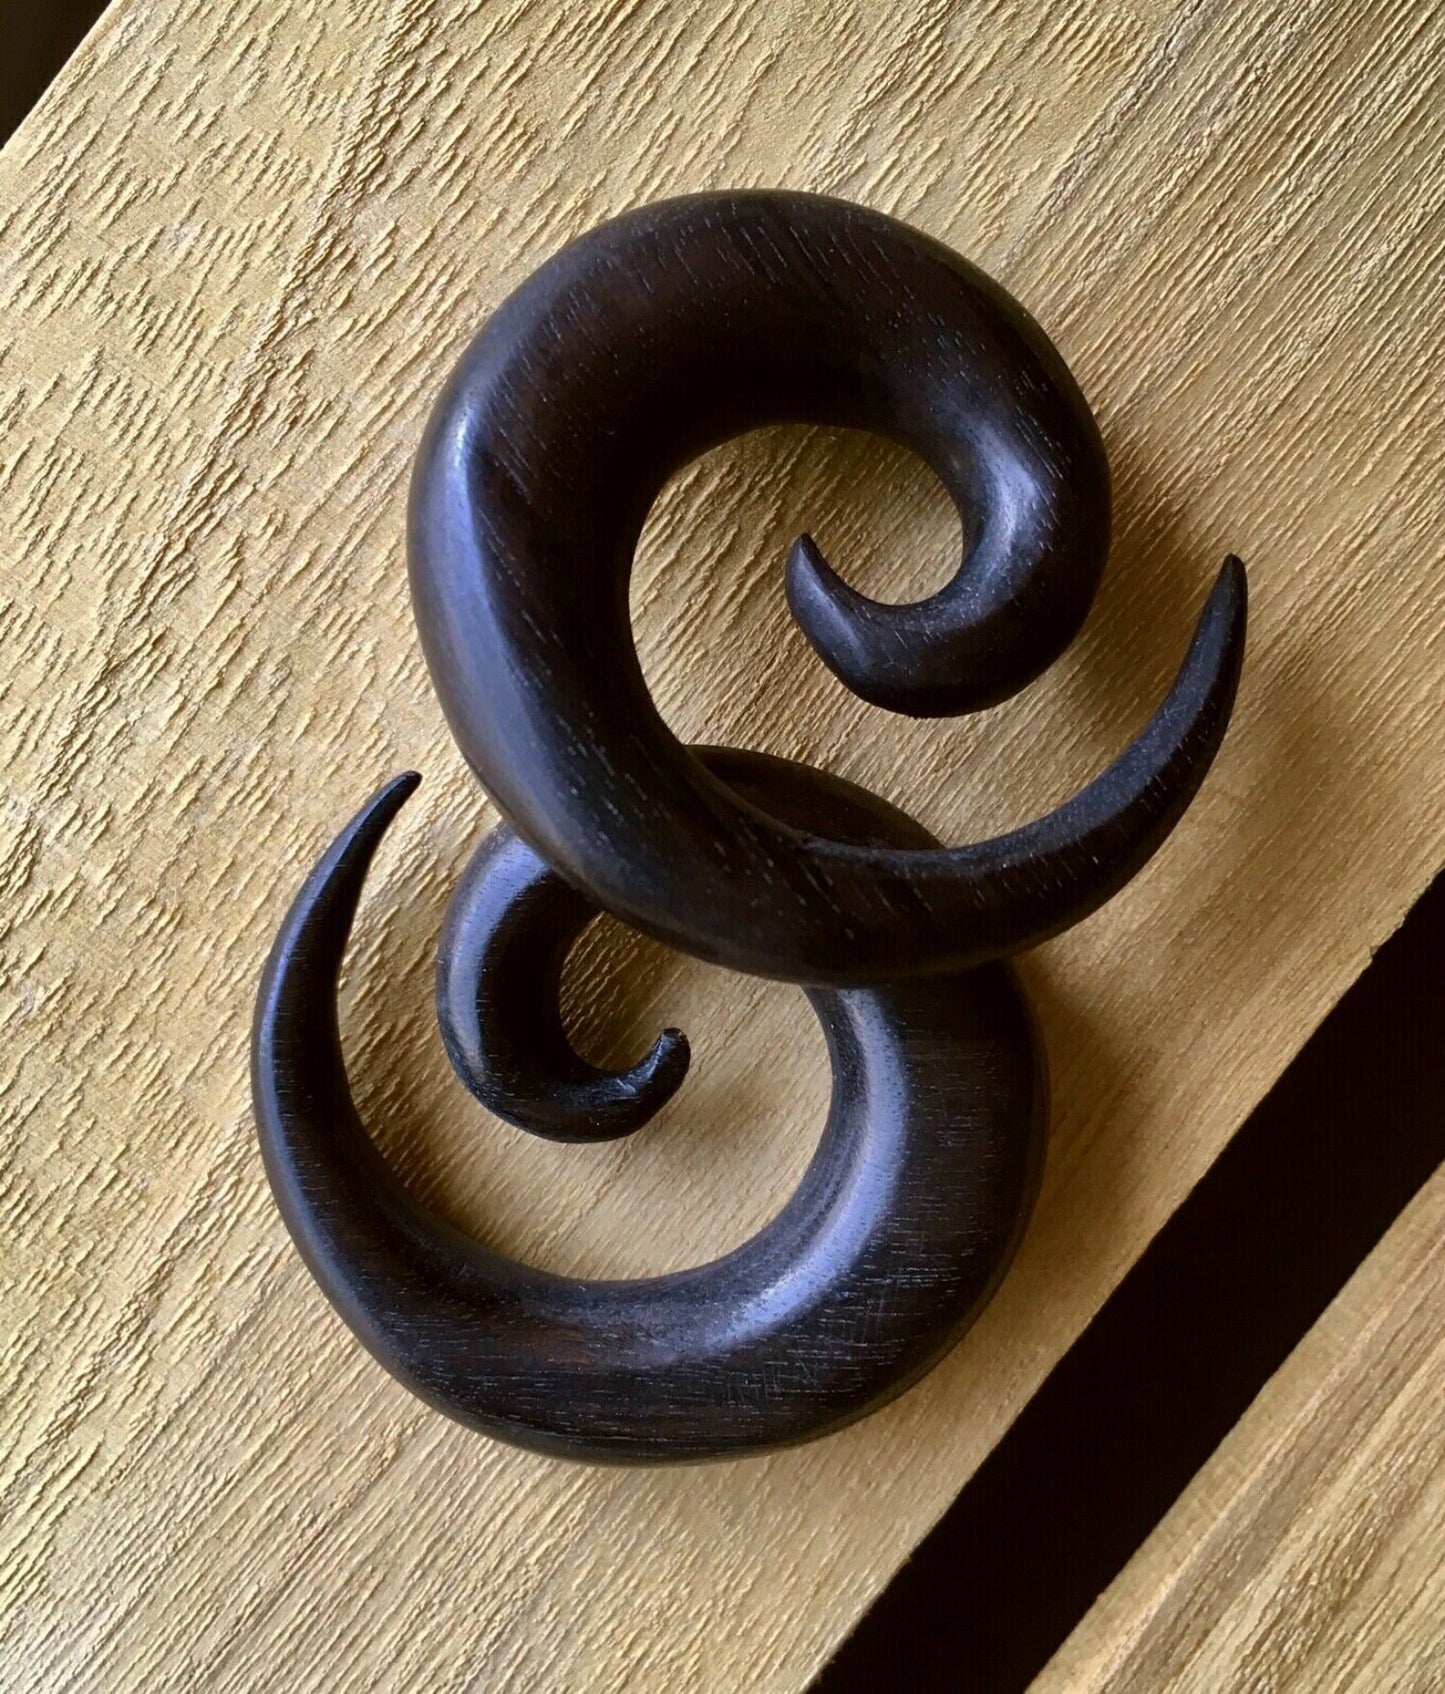 PAIR of Organic Black Areng Wood Spiral Tapers - Gauges 4g (5mm) up to 1/2" (12mm) available!